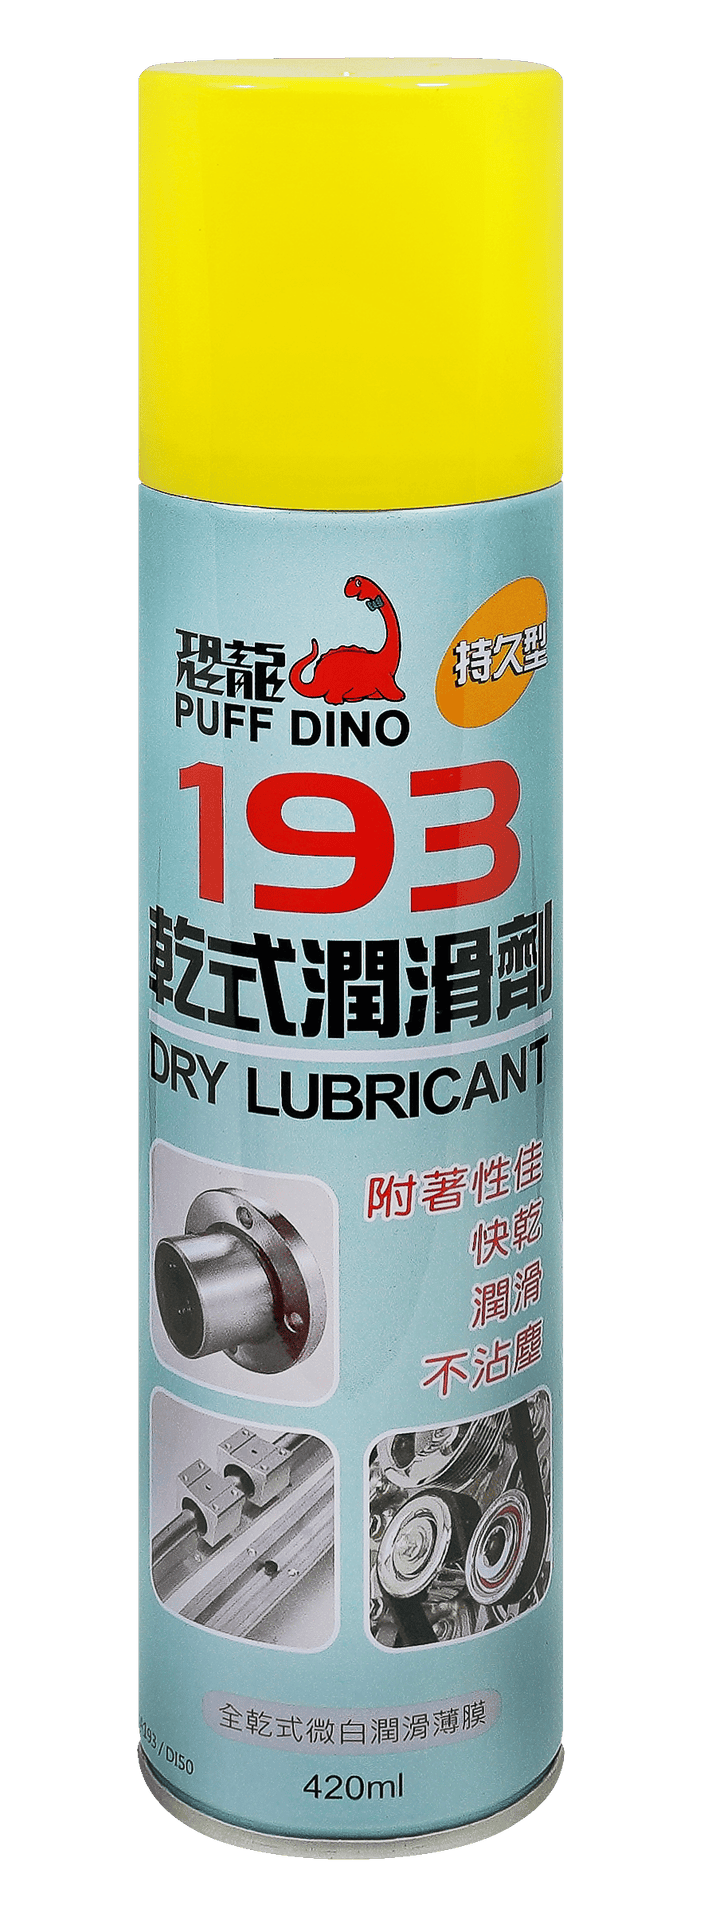 PUFF DINO 193 DRY LUBRICANT